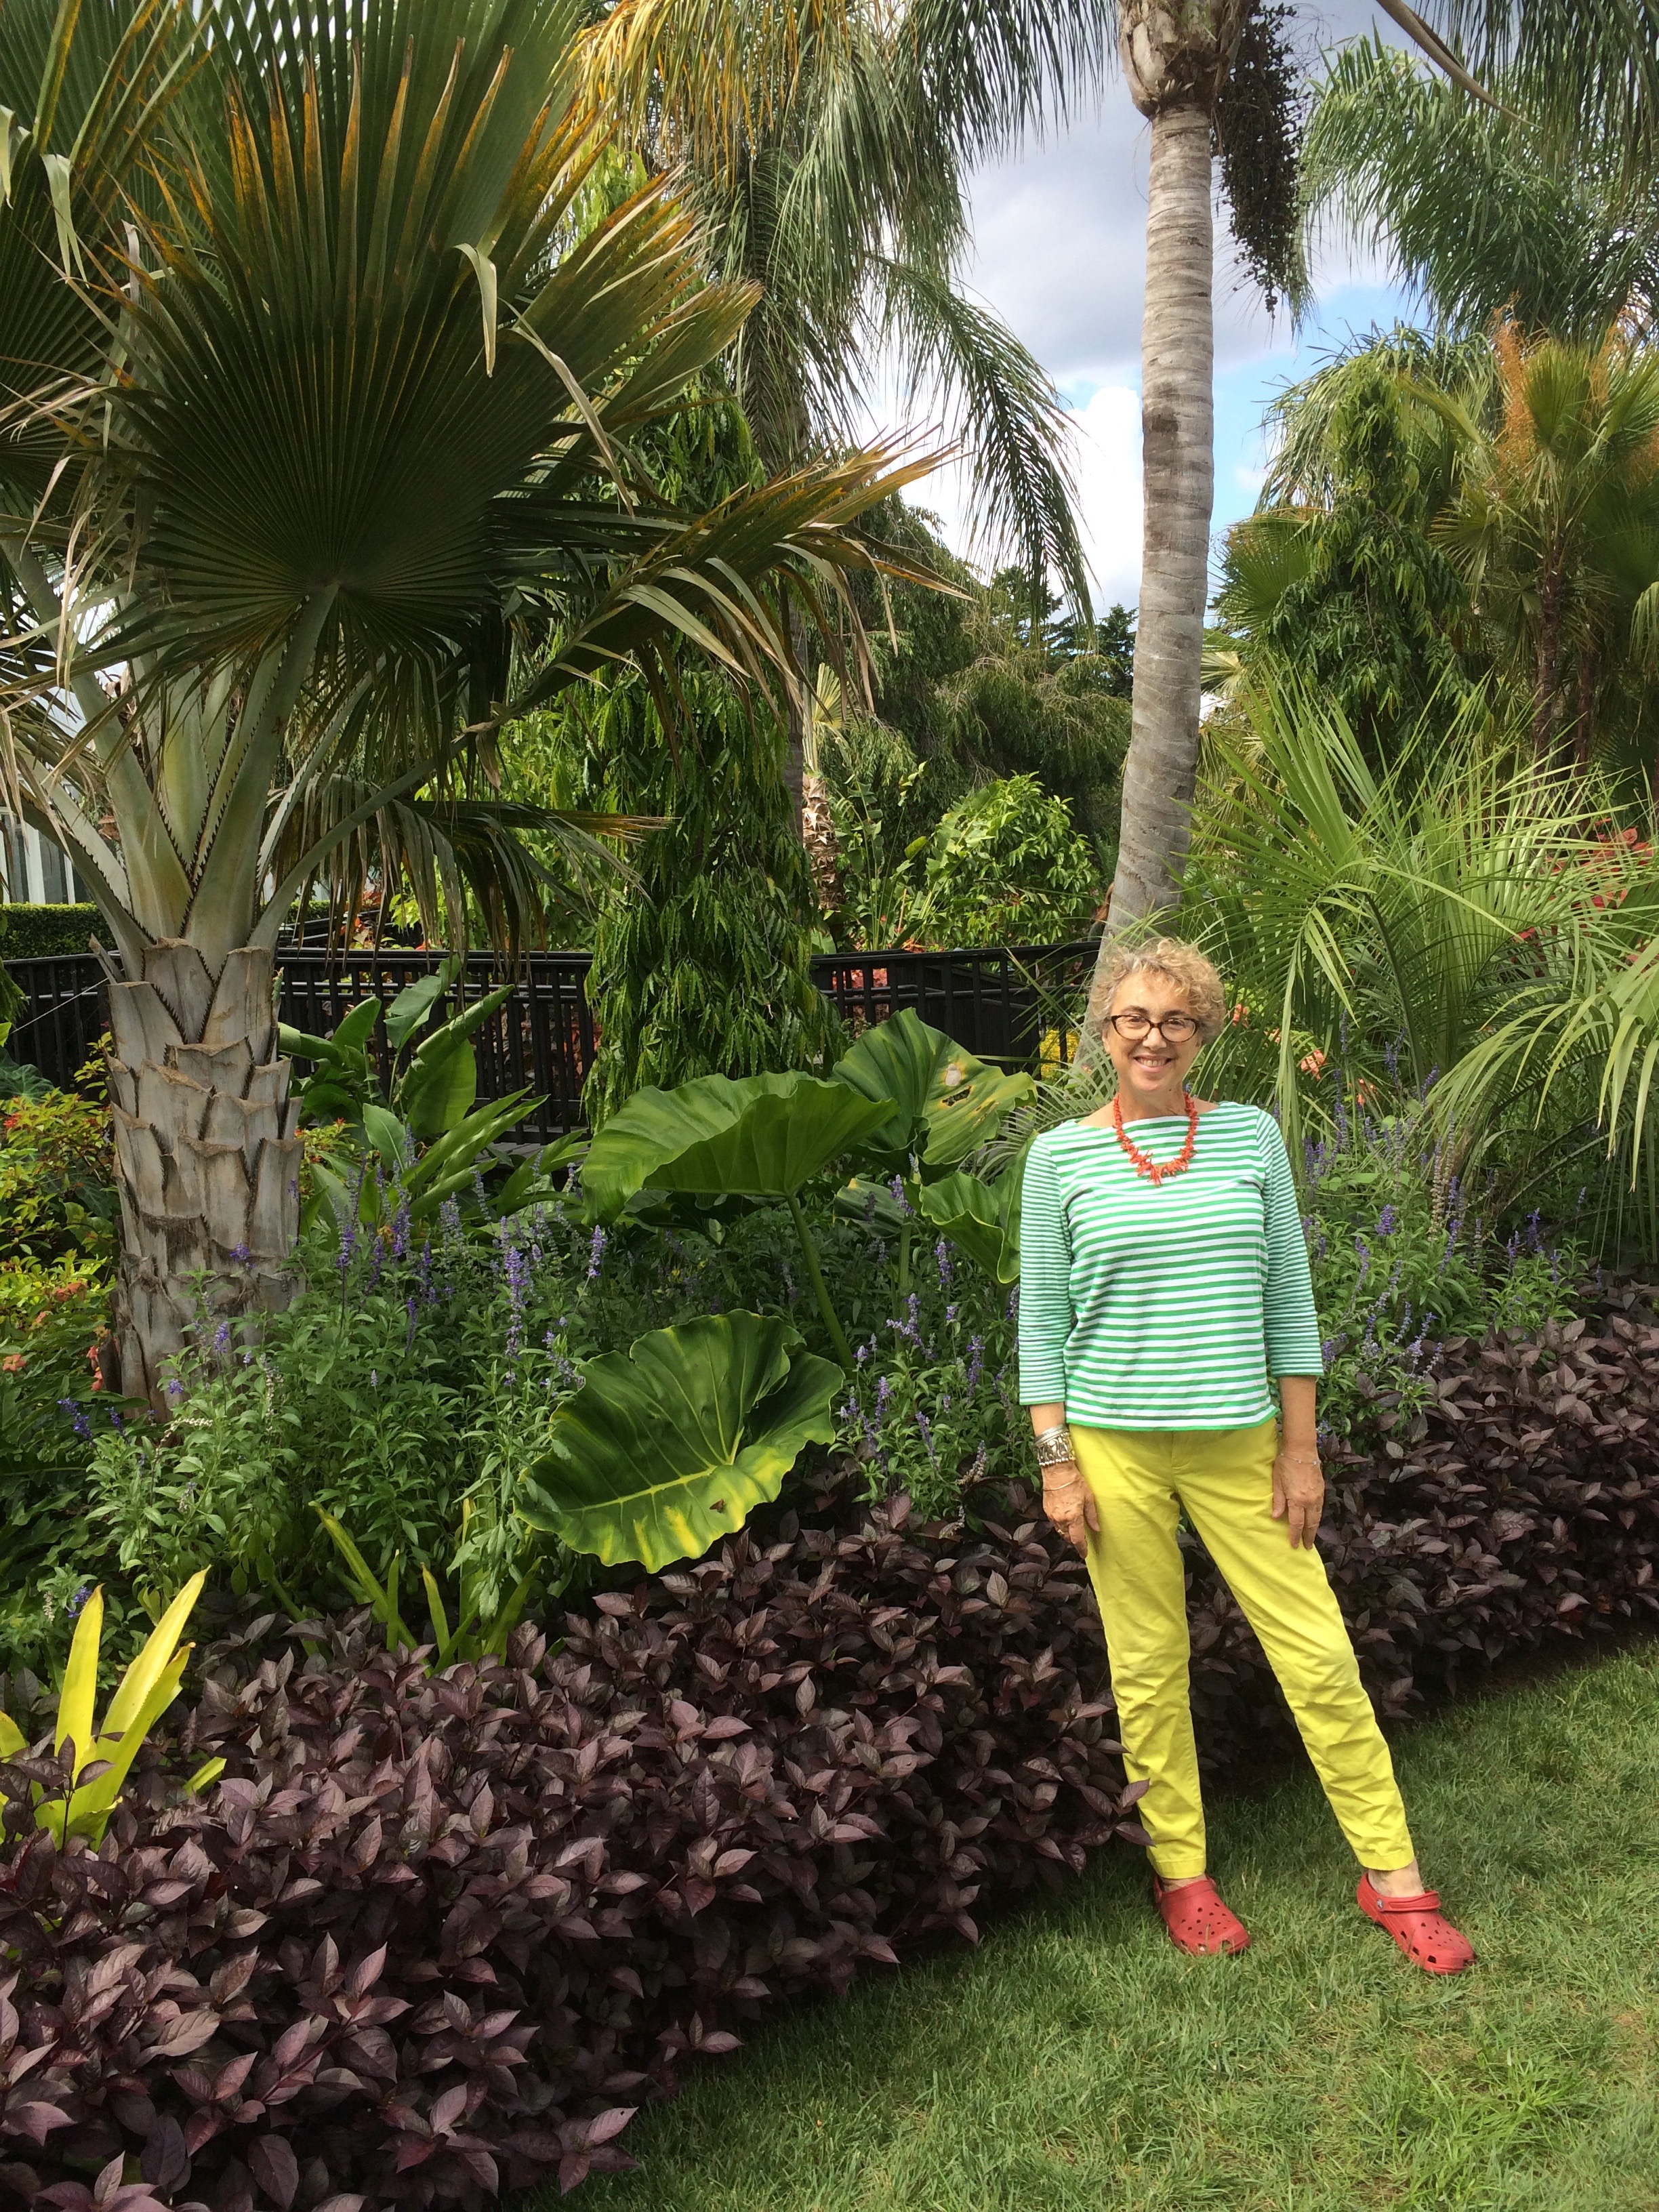 Posing with palms, philodendrons and bromeliads: Burle Marx would like my colors!